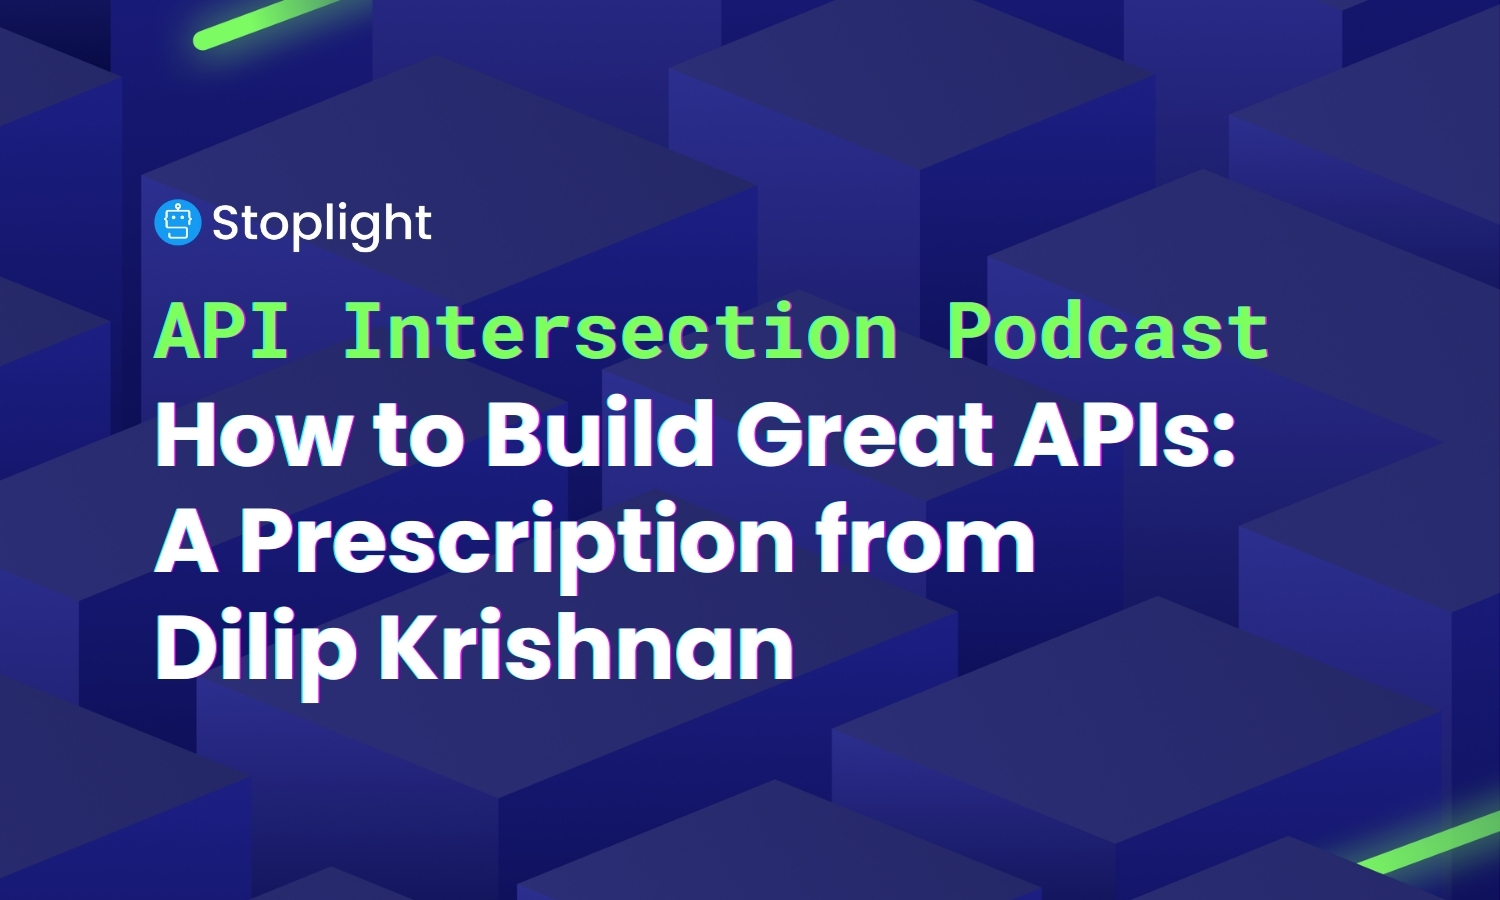 How to Build Great APIs: A Prescription from Dilip Krishnan